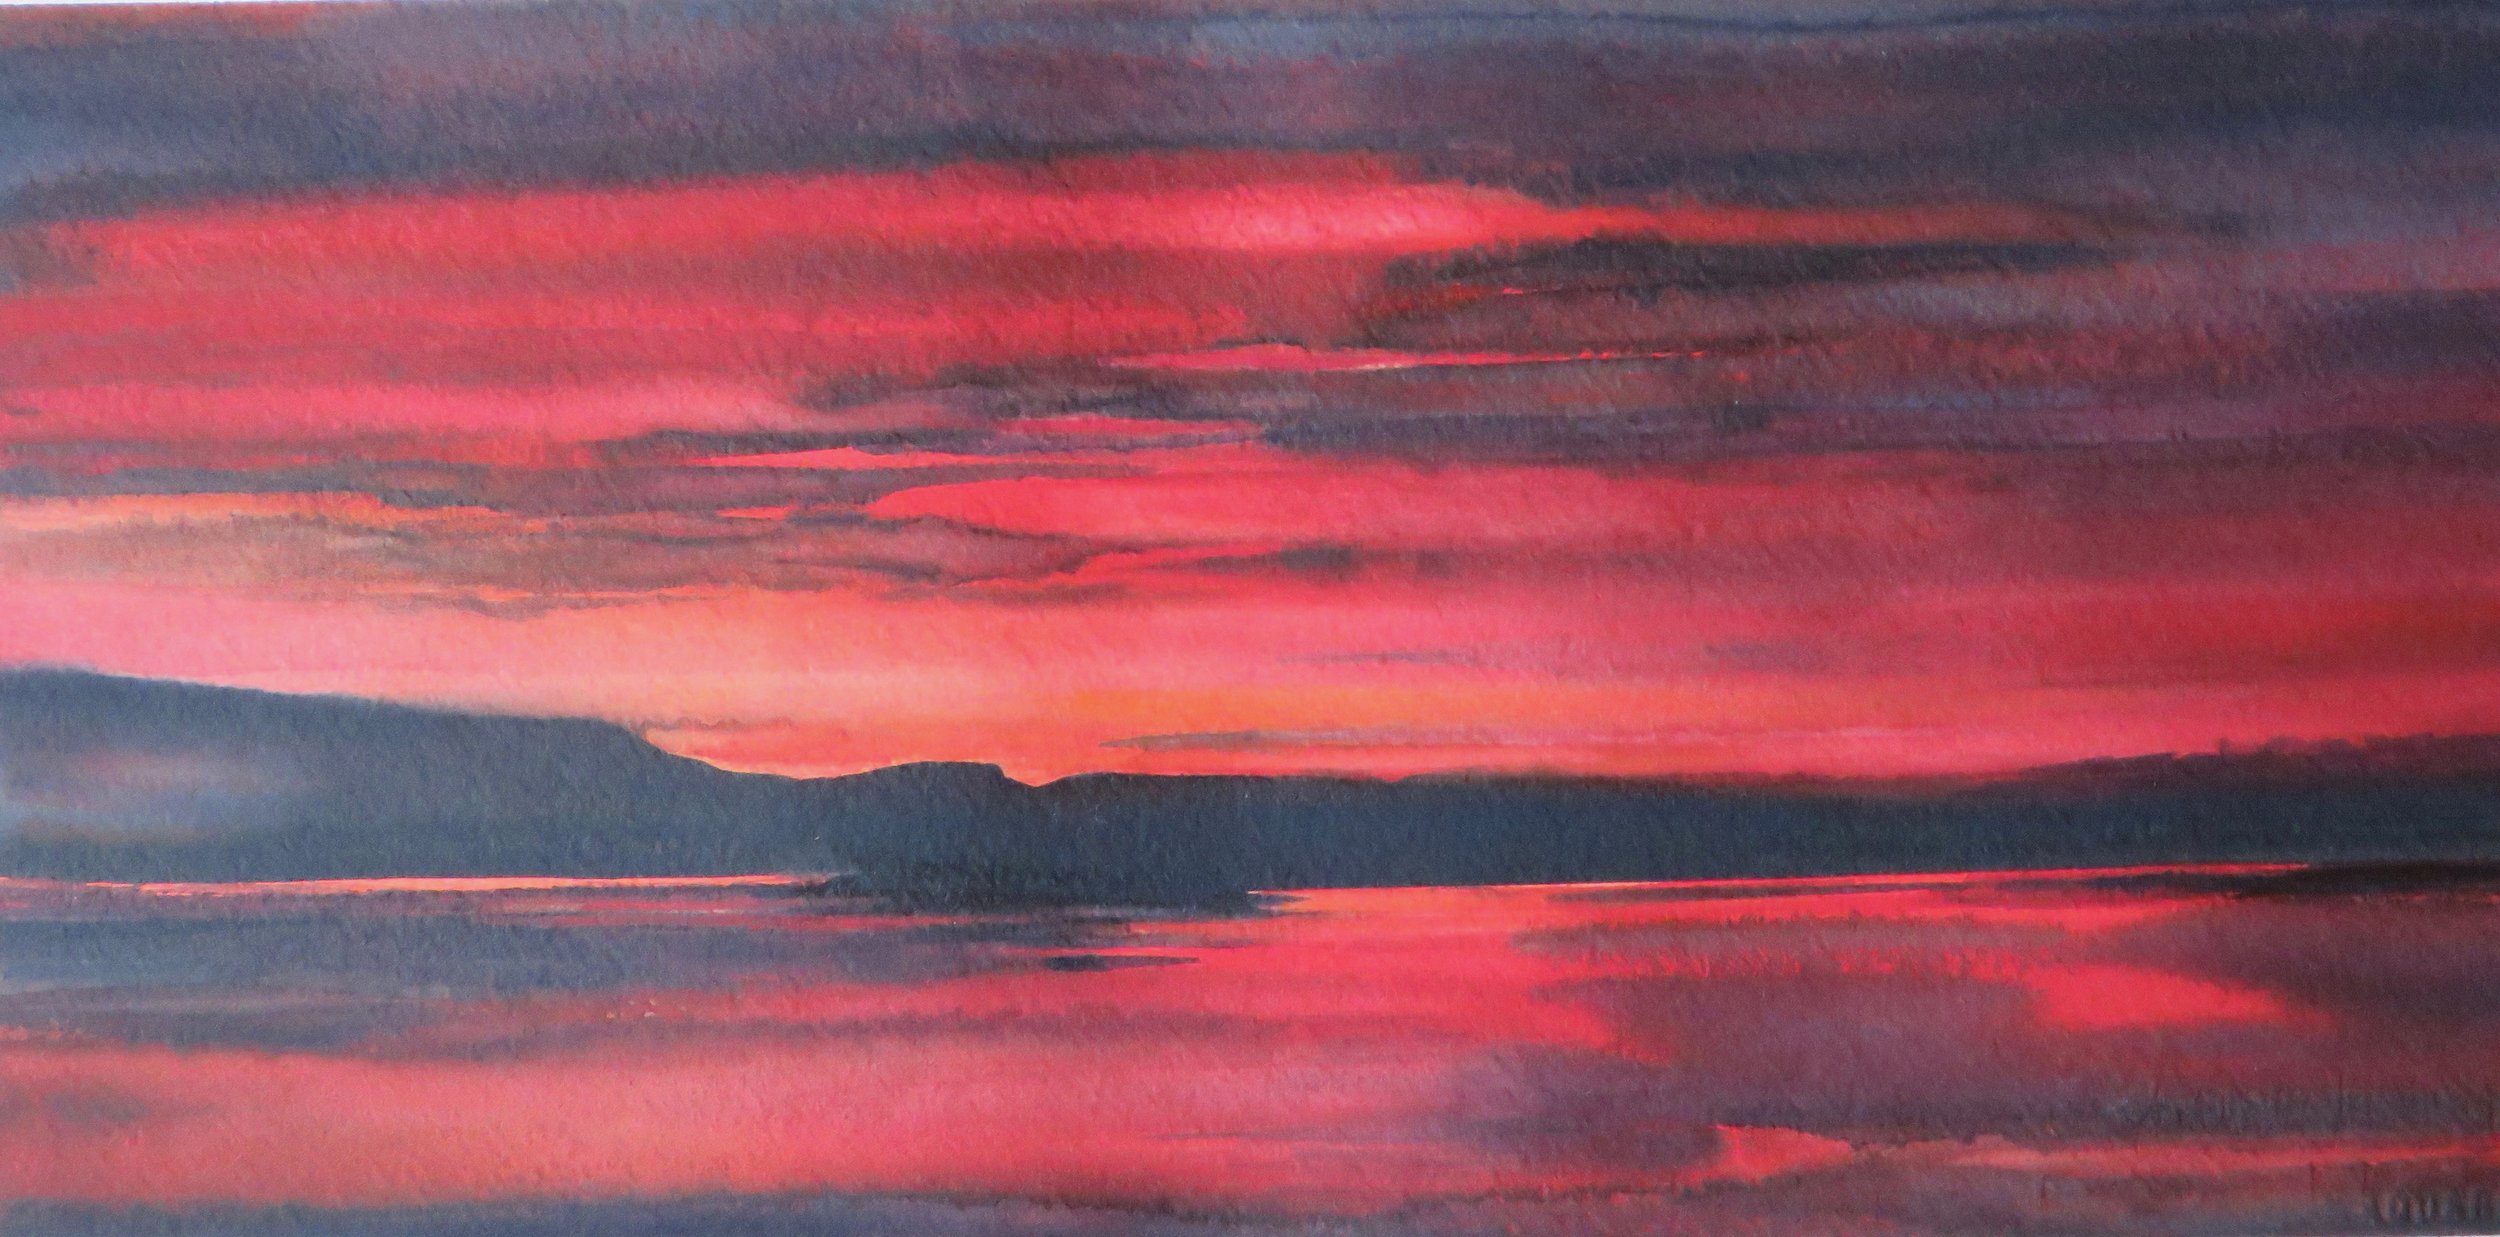  Red Sunset  SOLD 